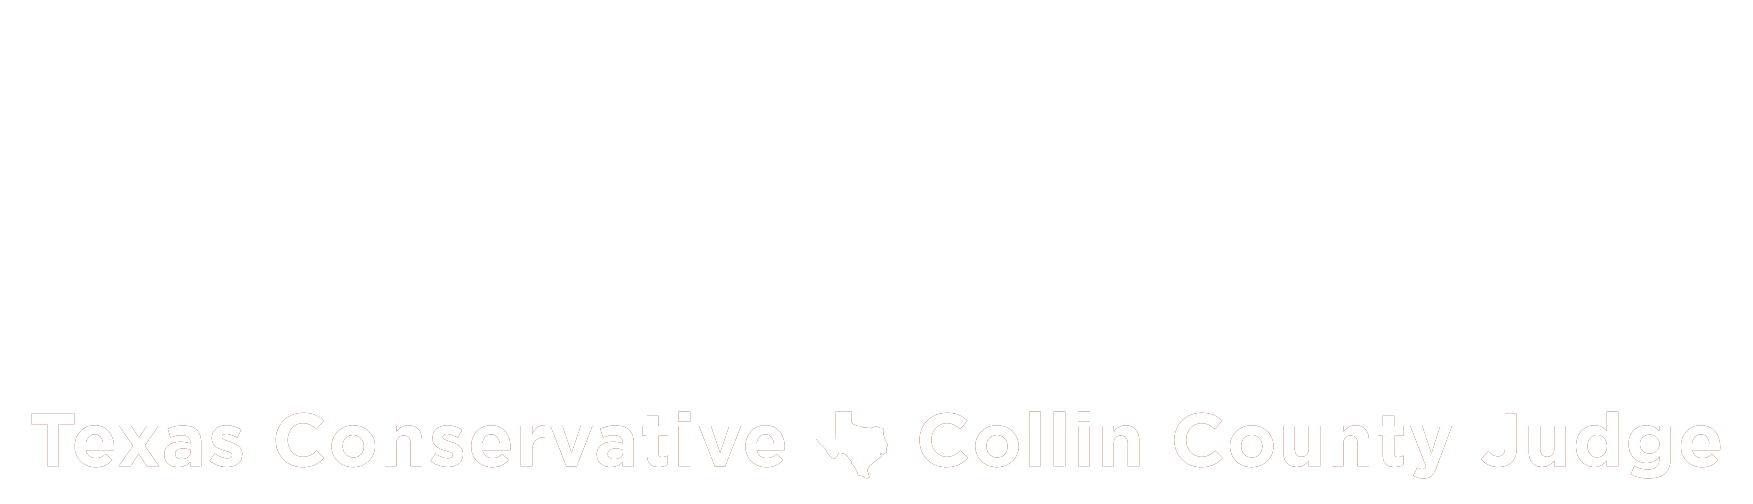 Chris Hill. Texas Conservative. Collin County Judge.